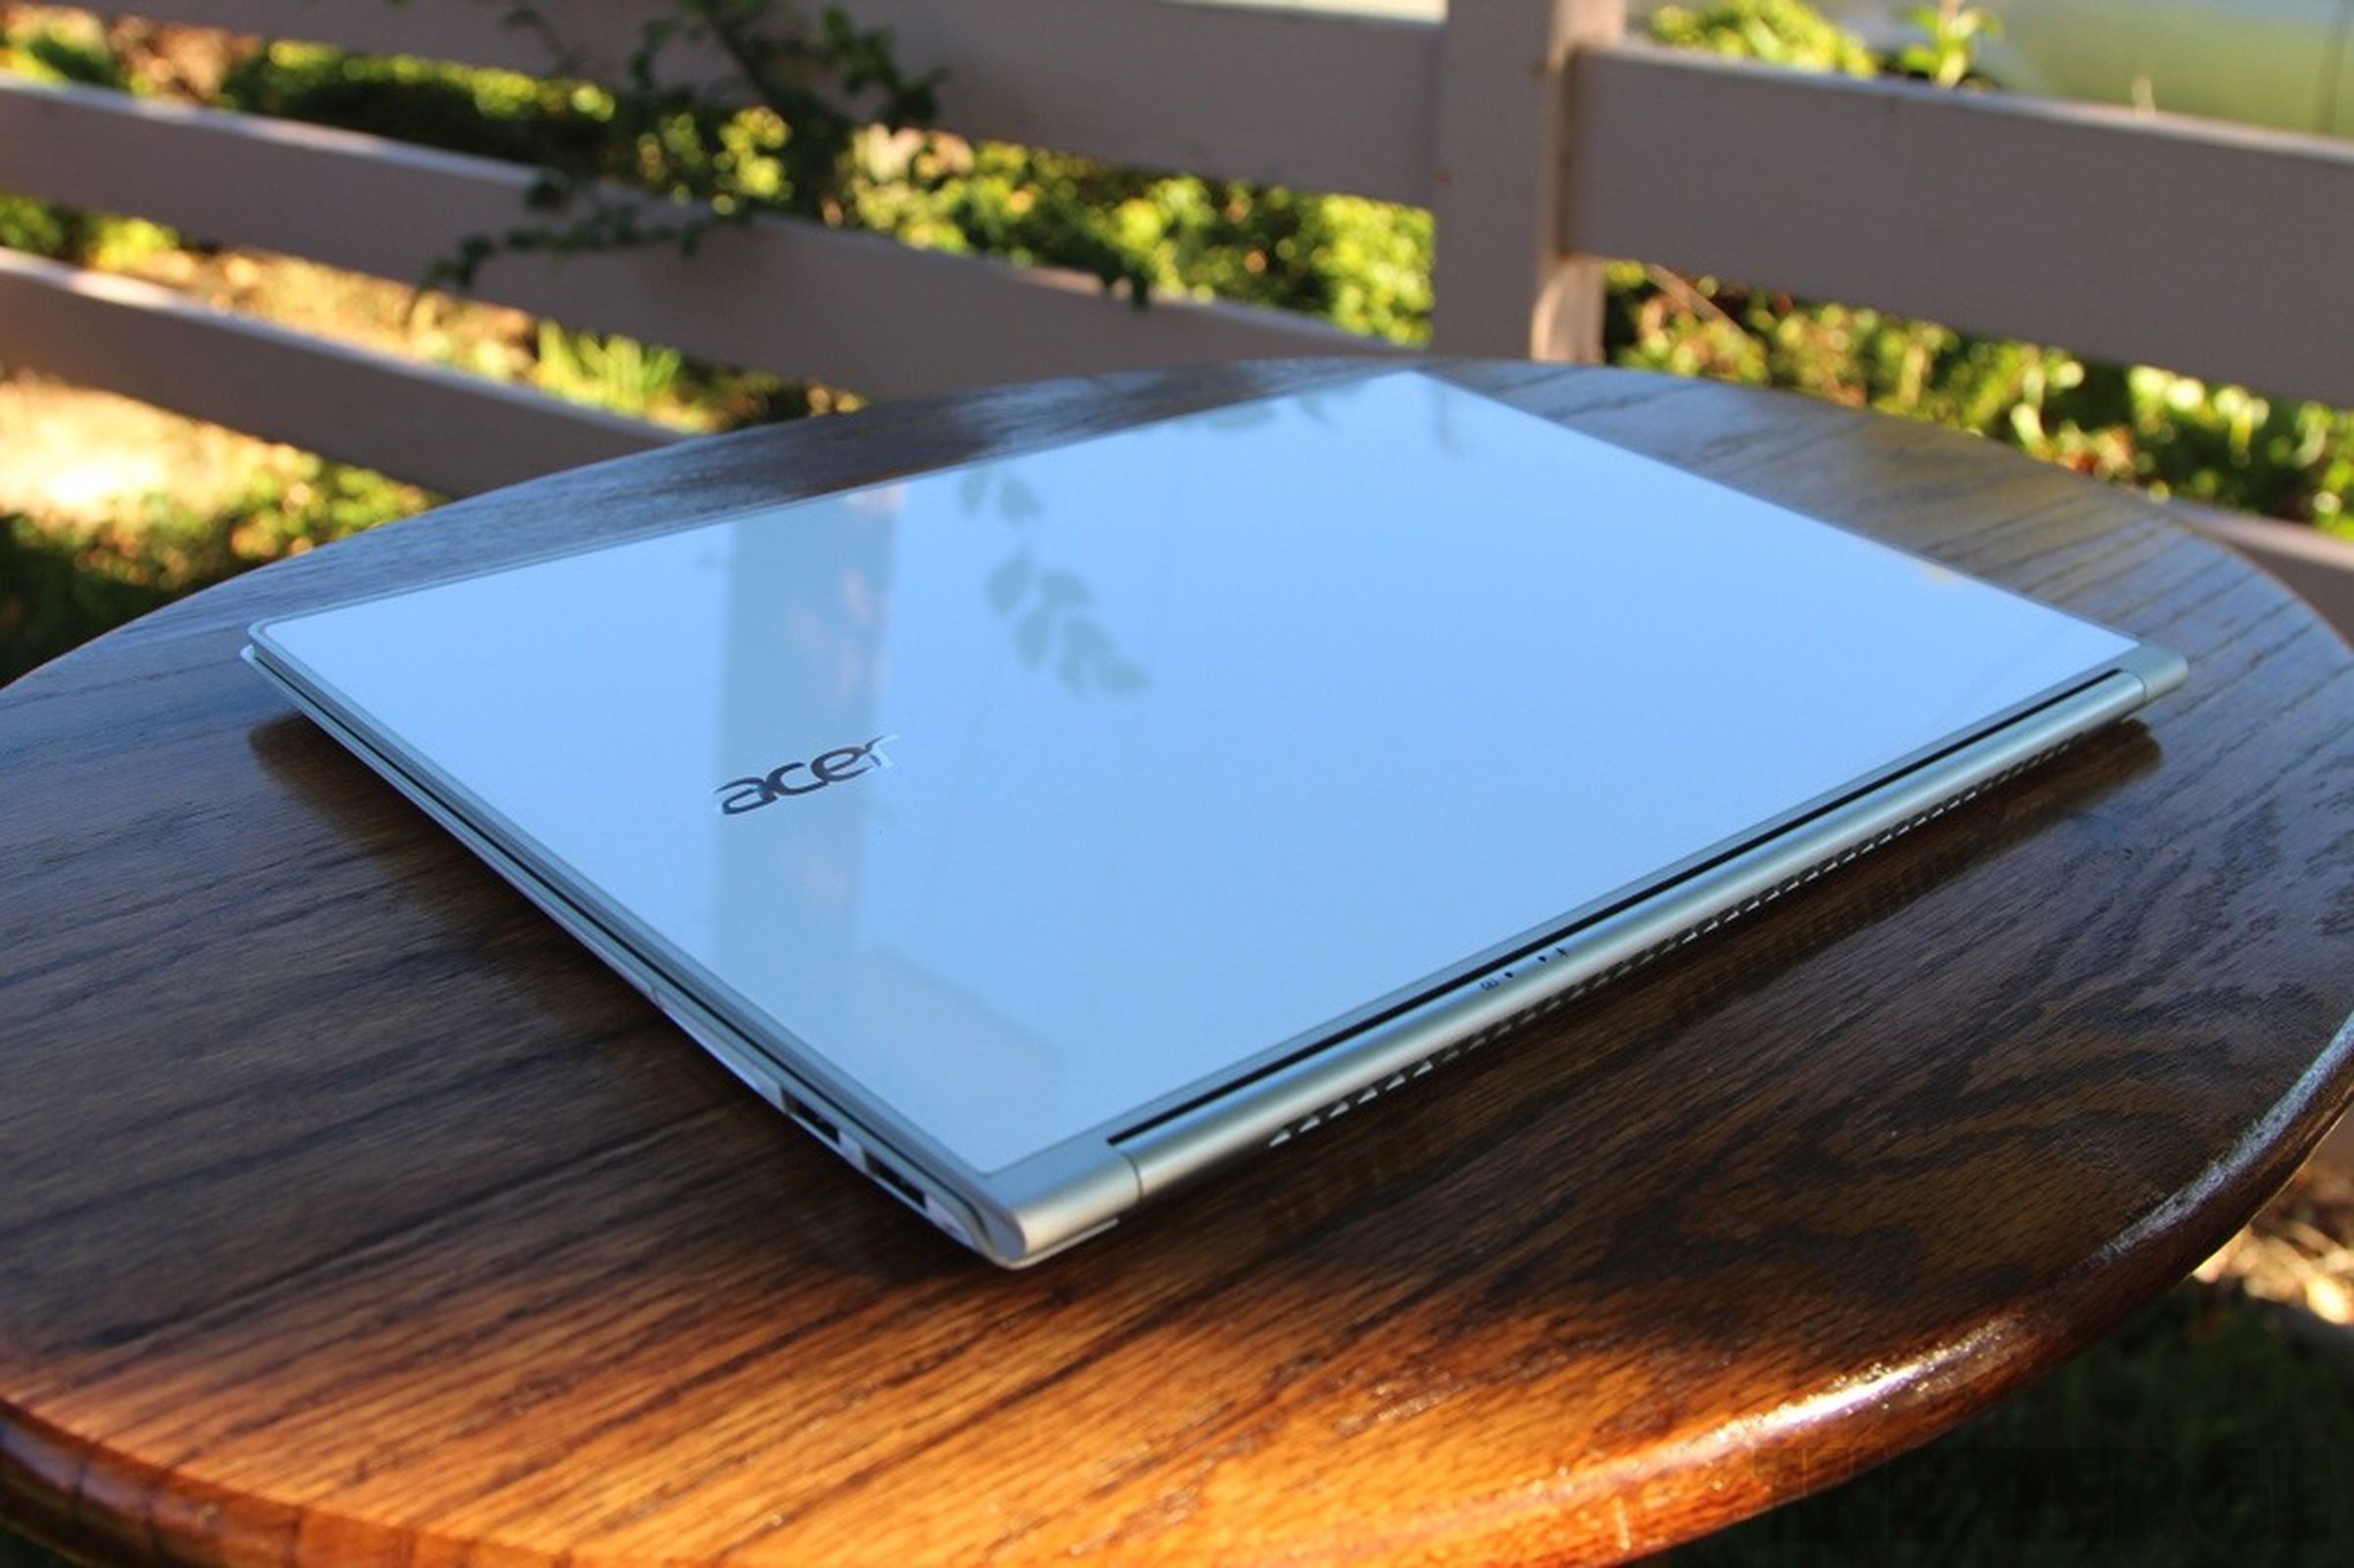 Acer Aspire S7 pictures